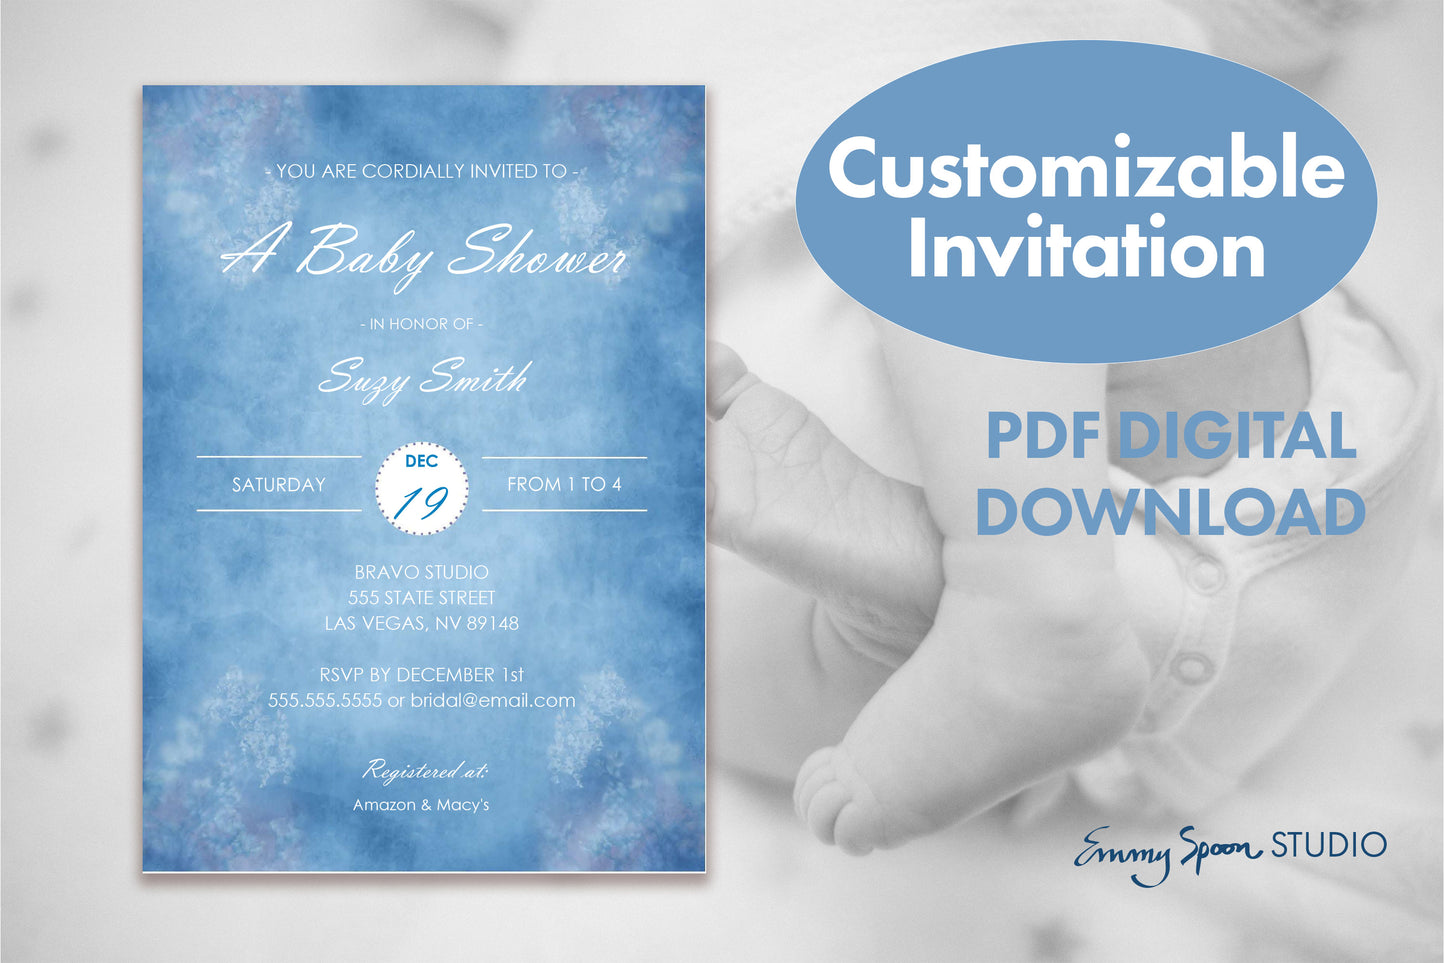 Customizable Invitation shows baby shower example. PDF Digital Download by Emmy Spoon Studio